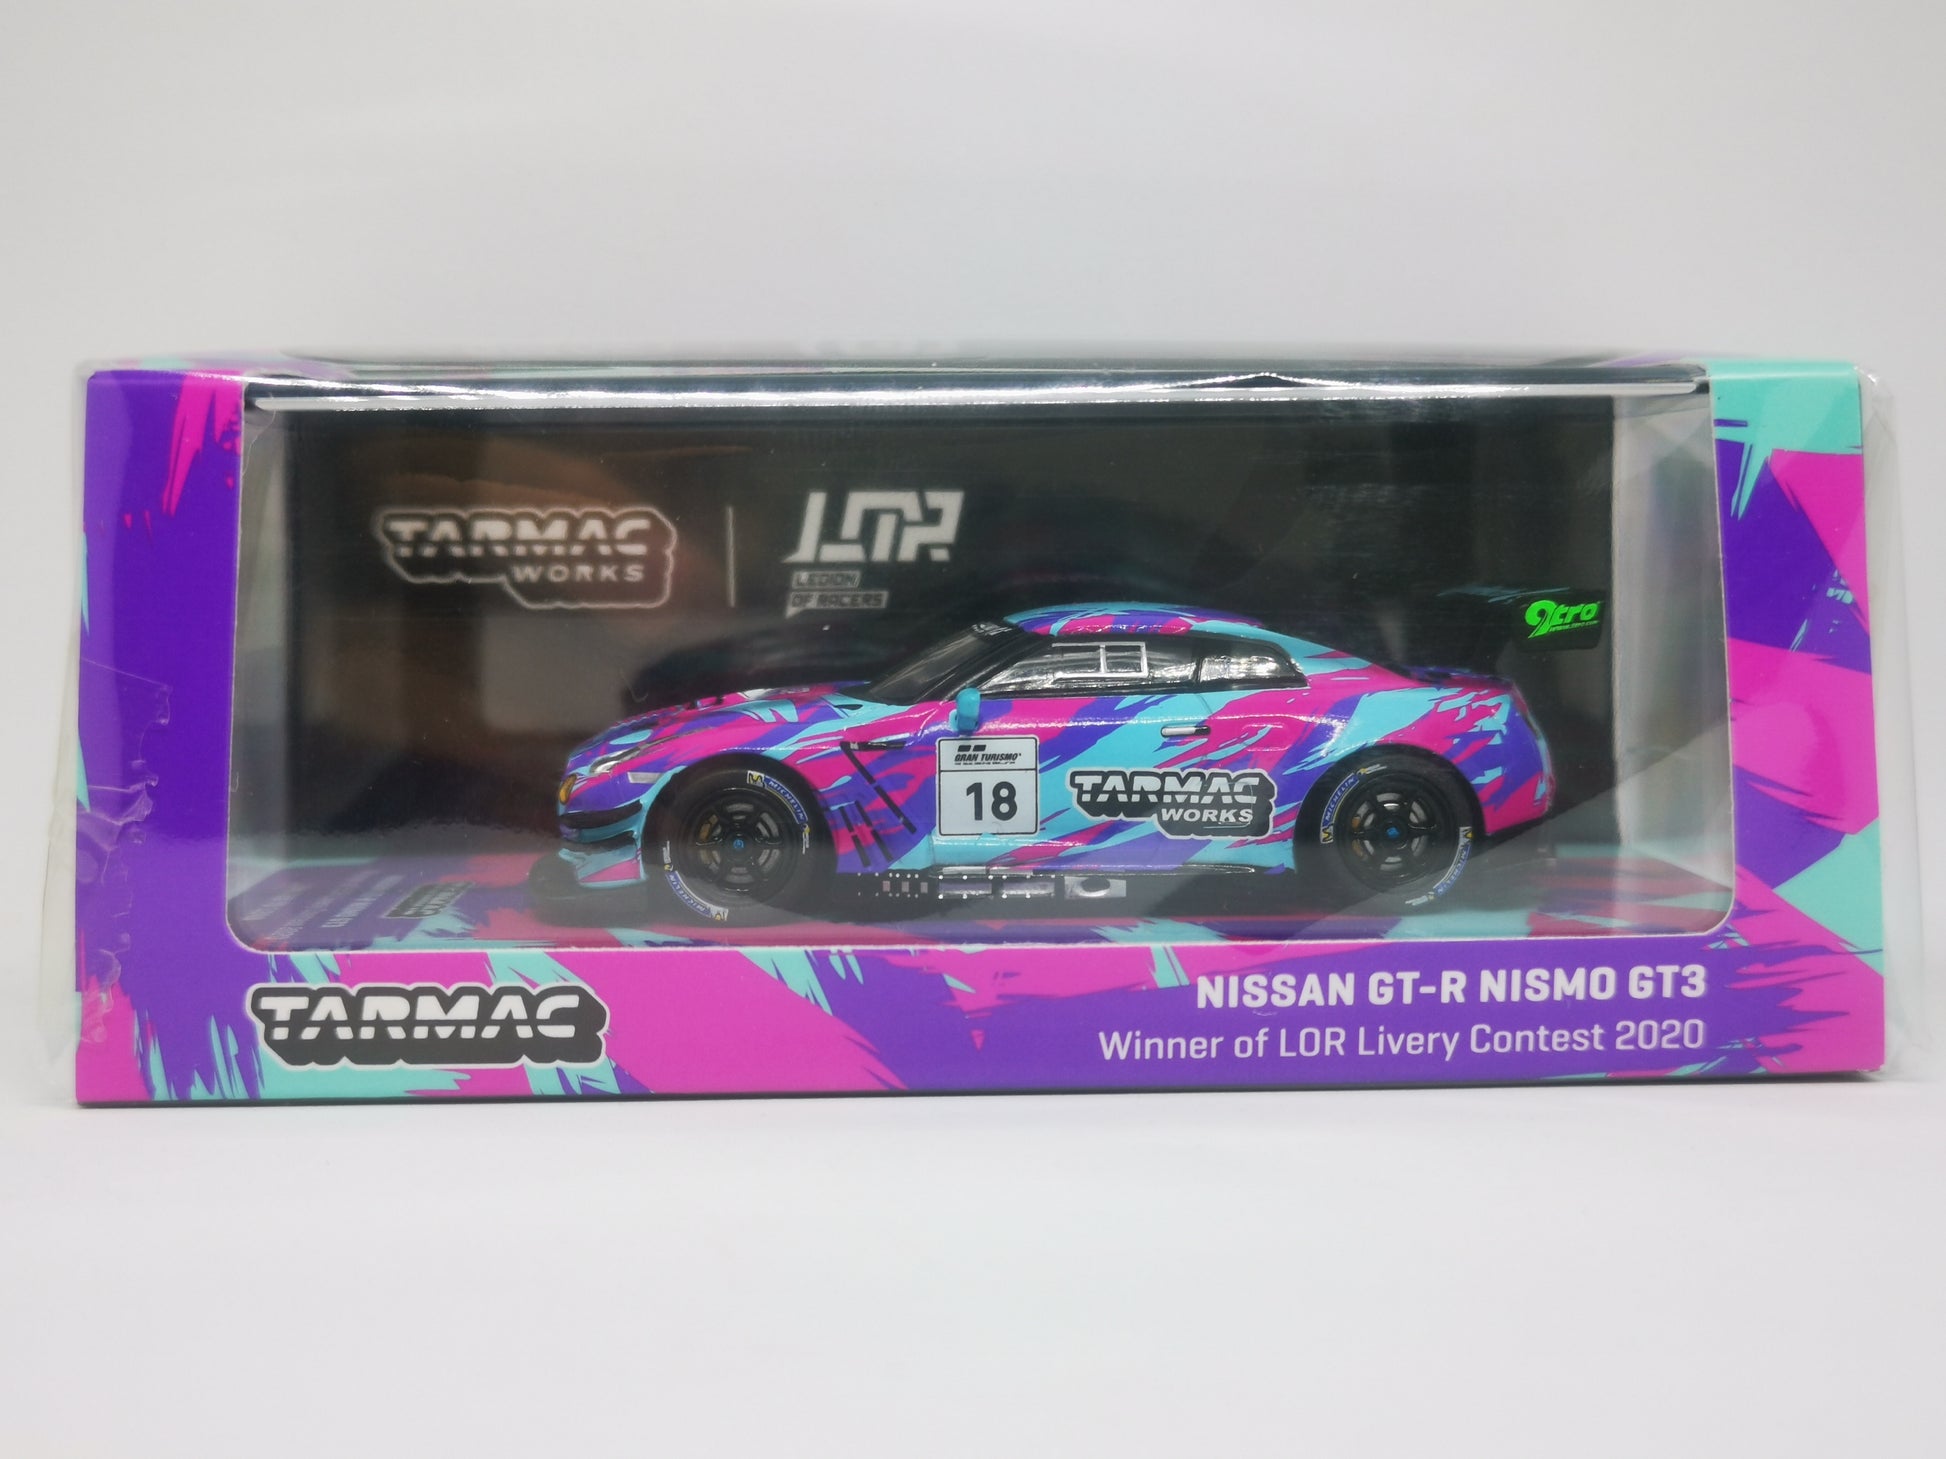 Tarmacworks 1:64 Scale Nissan GT-R Nismo GT3 winner of LOR Livery Contest 2020 Tarmacworks